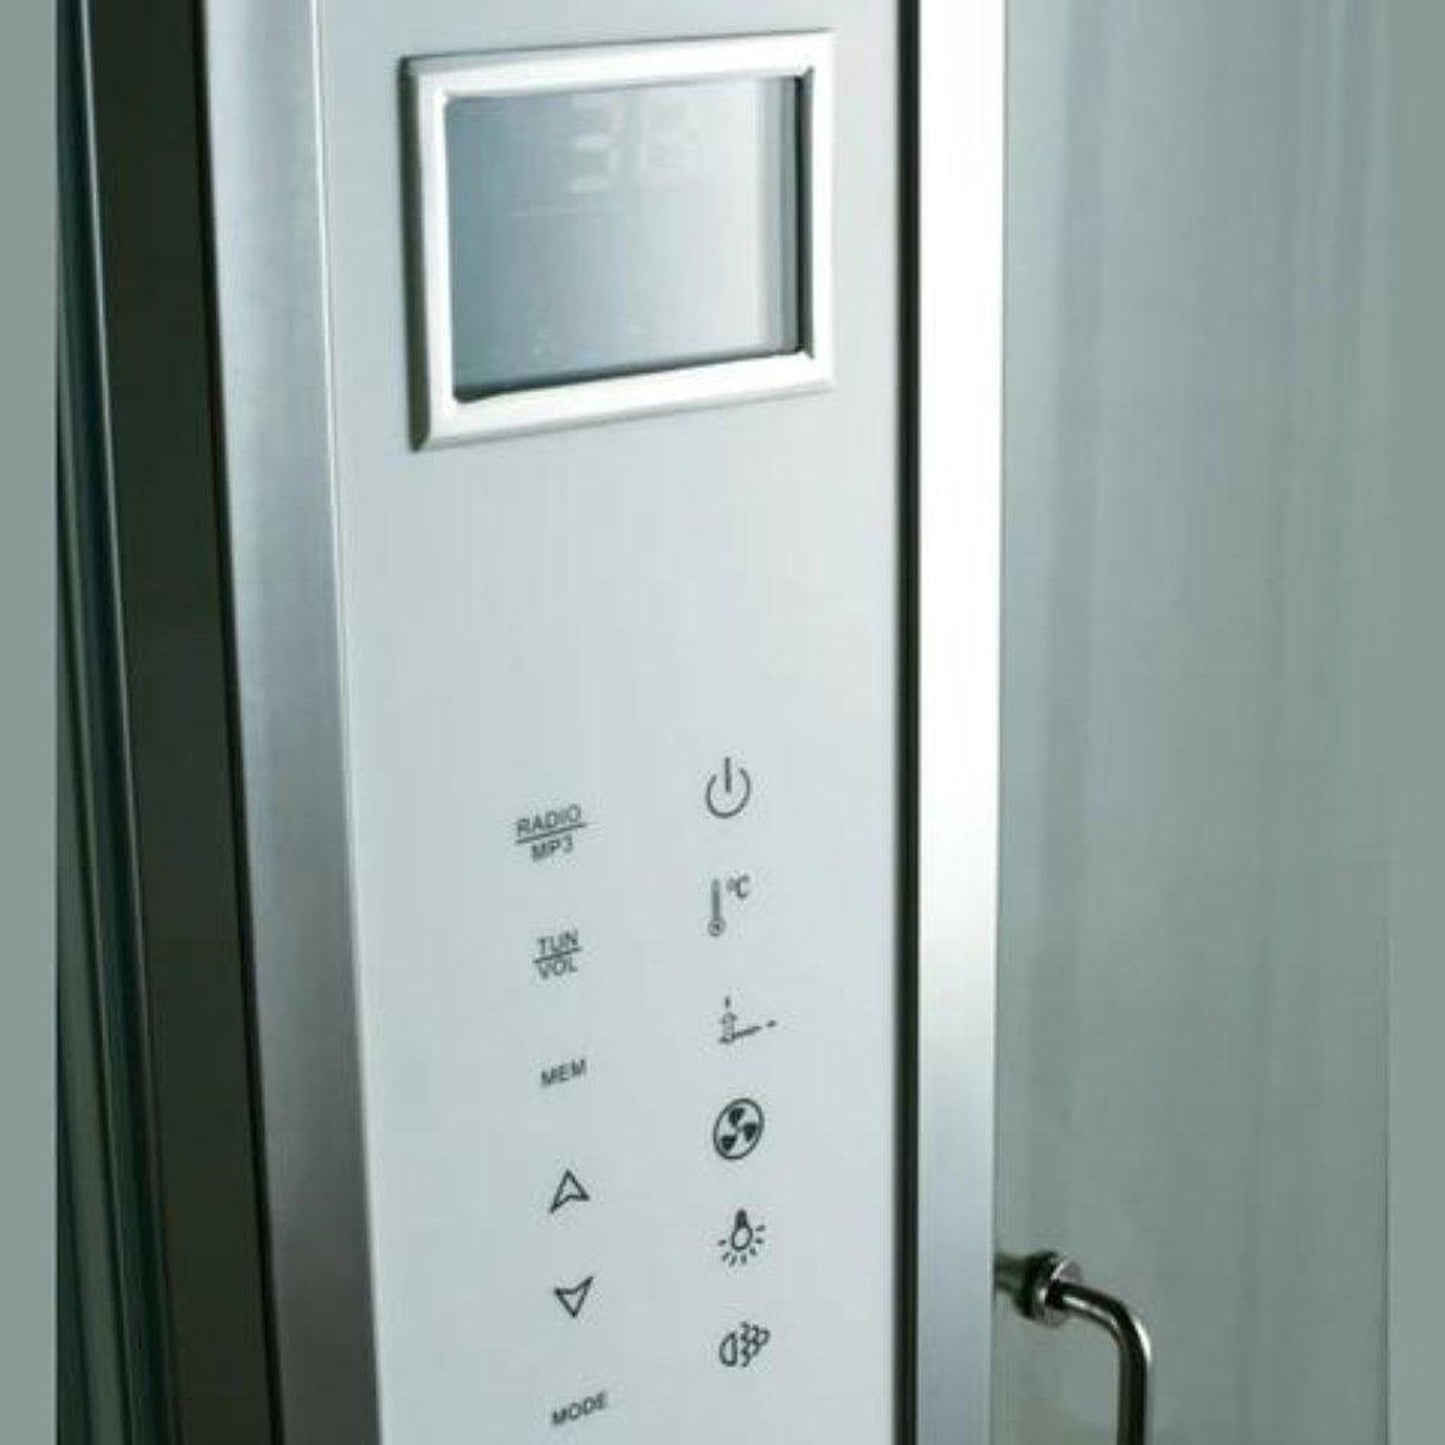 Athena 59" x 36" x 89" Two Person Rectangle Steam Shower With Dual Hinged Doors 12 Massage Jets & LED Chromatherapy Lighting